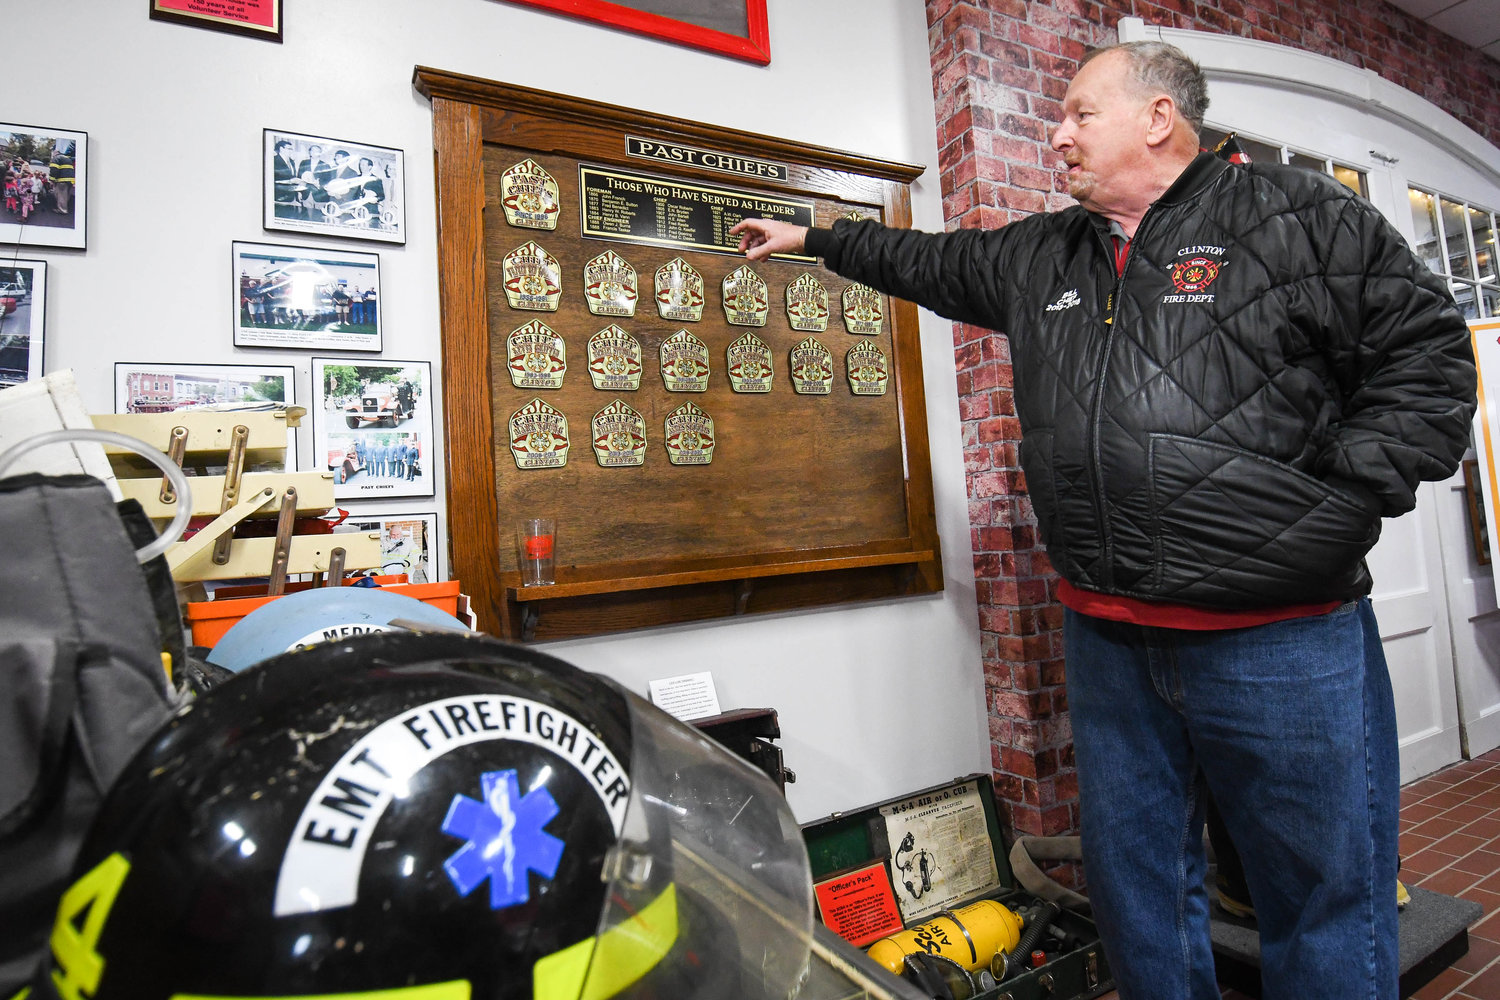 Former fire chief Bill Huther shows a board of past chiefs in the Clinton Fire Department Museum on Franklin Avenue in Clinton. The line of chiefs dates back more than 150 years.